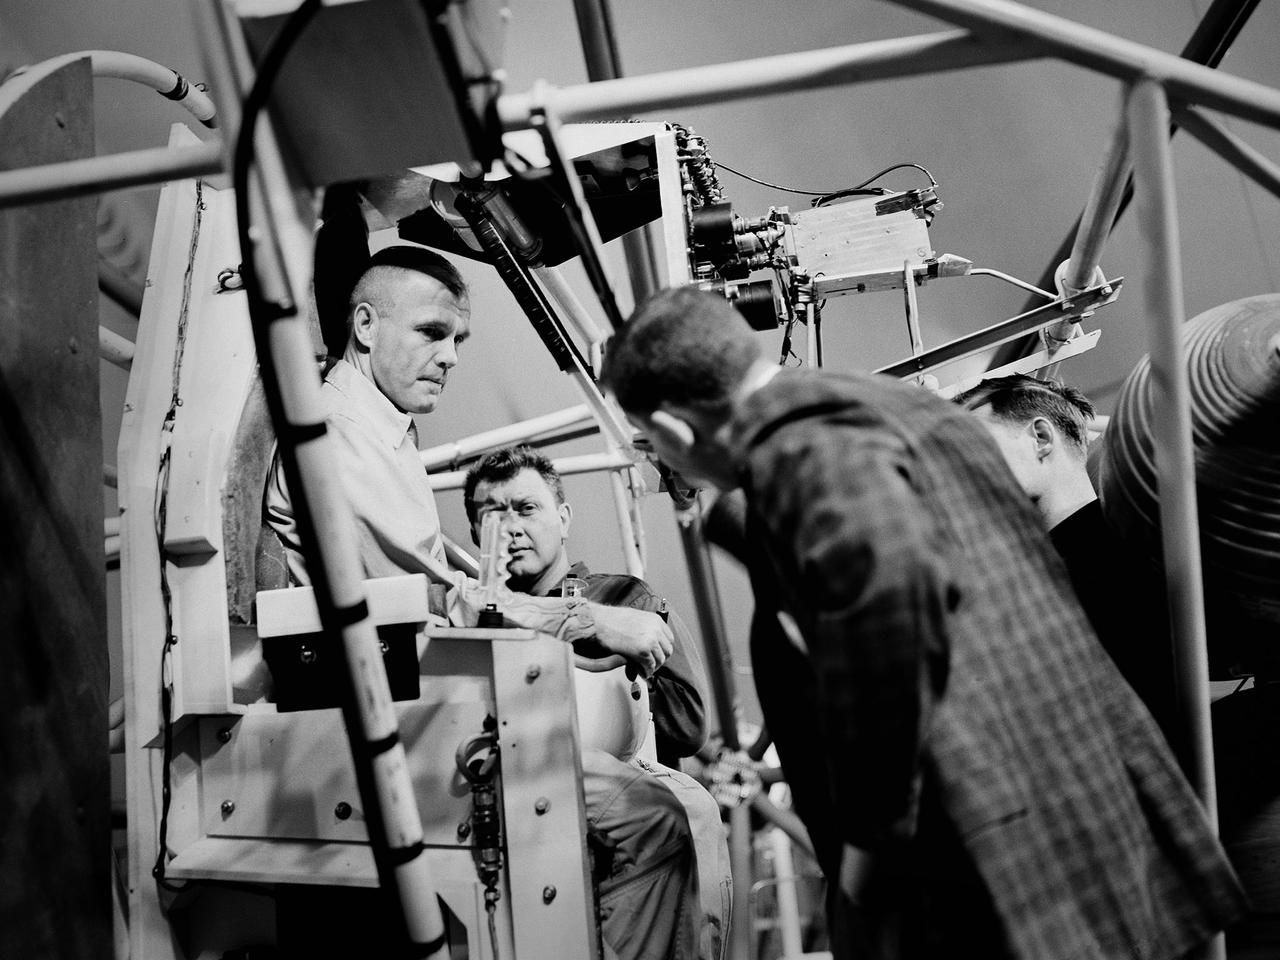 Mercury astronaut John Glenn prepares for a test in the Multi-Axis Space Test Inertia Facility (MASTIF) inside the Altitude Wind Tunnel at the National Aeronautics and Space Administration (NASA) Lewis Research Center.